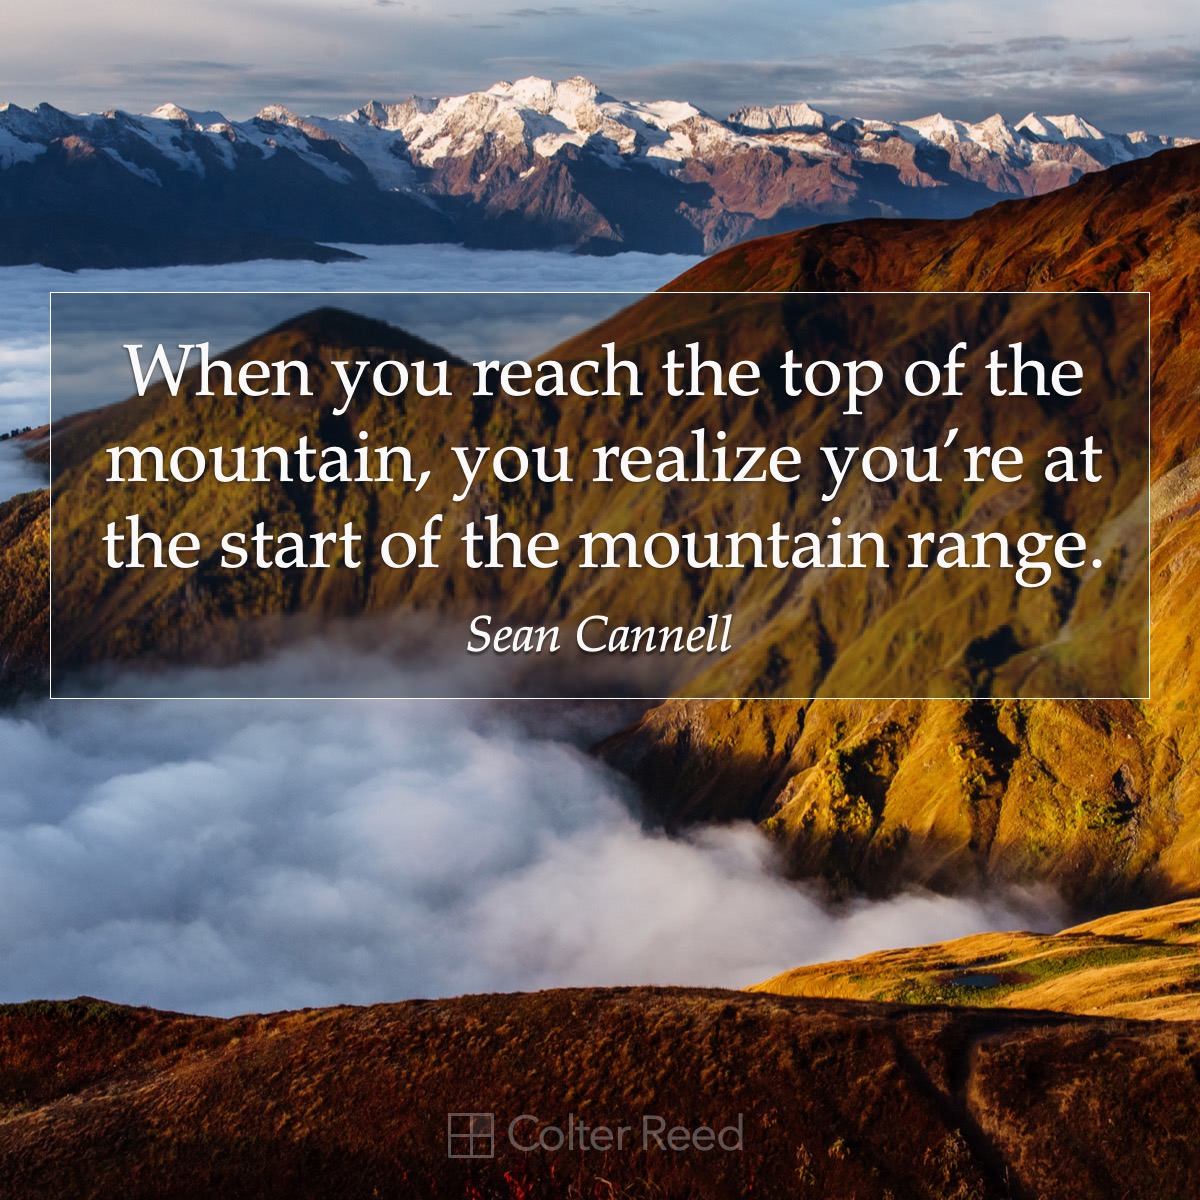 When you reach the top of the mountain, you realize you’re at the start of the mountain range. —Sean Cannell